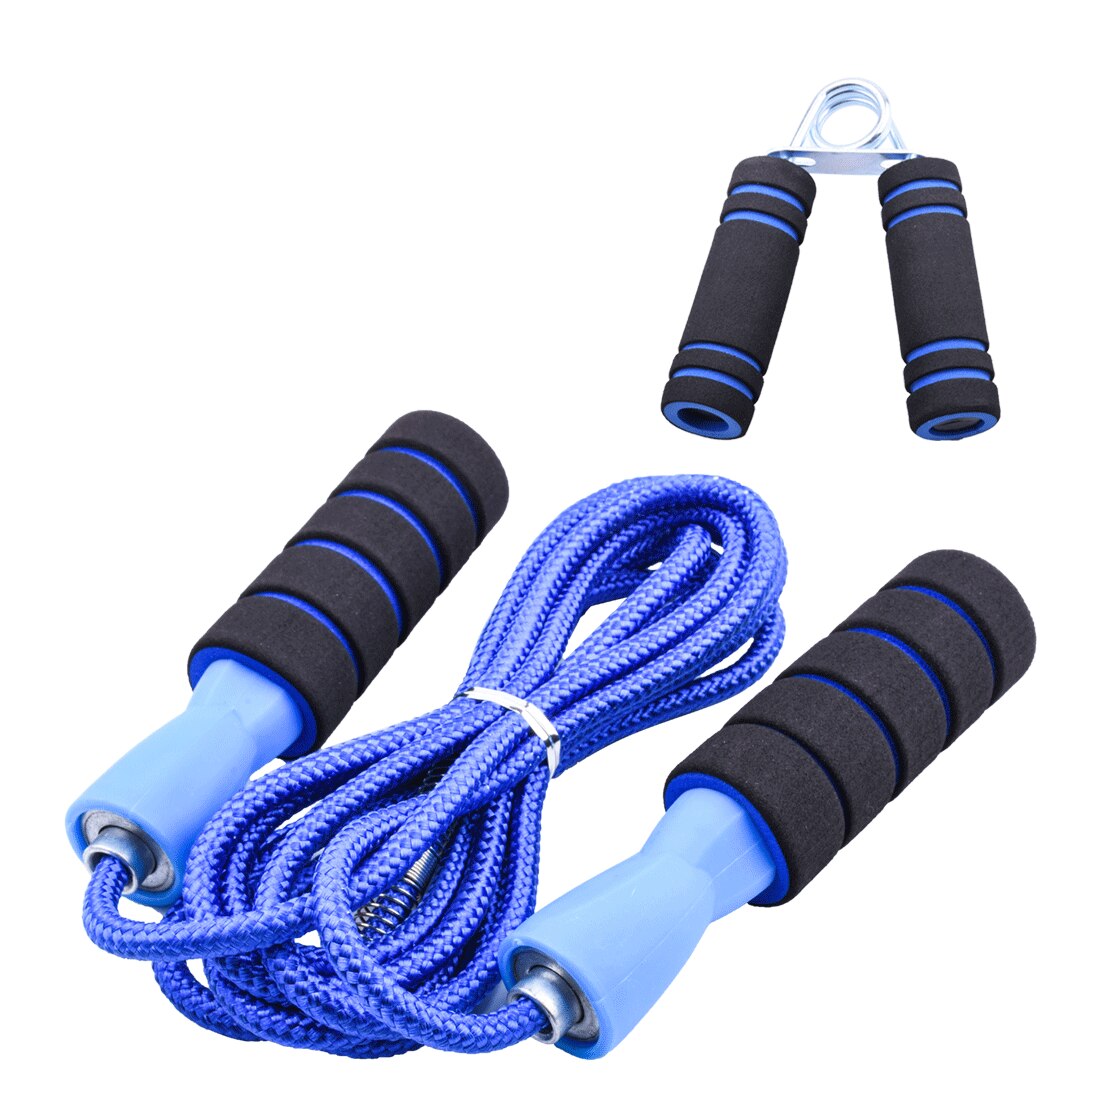 AB Roller Wheel Abdominal Exercise Jump Rope Push up Rack Resistance Bands Muscle Trainer Fitness Home Gym Workout Equipment